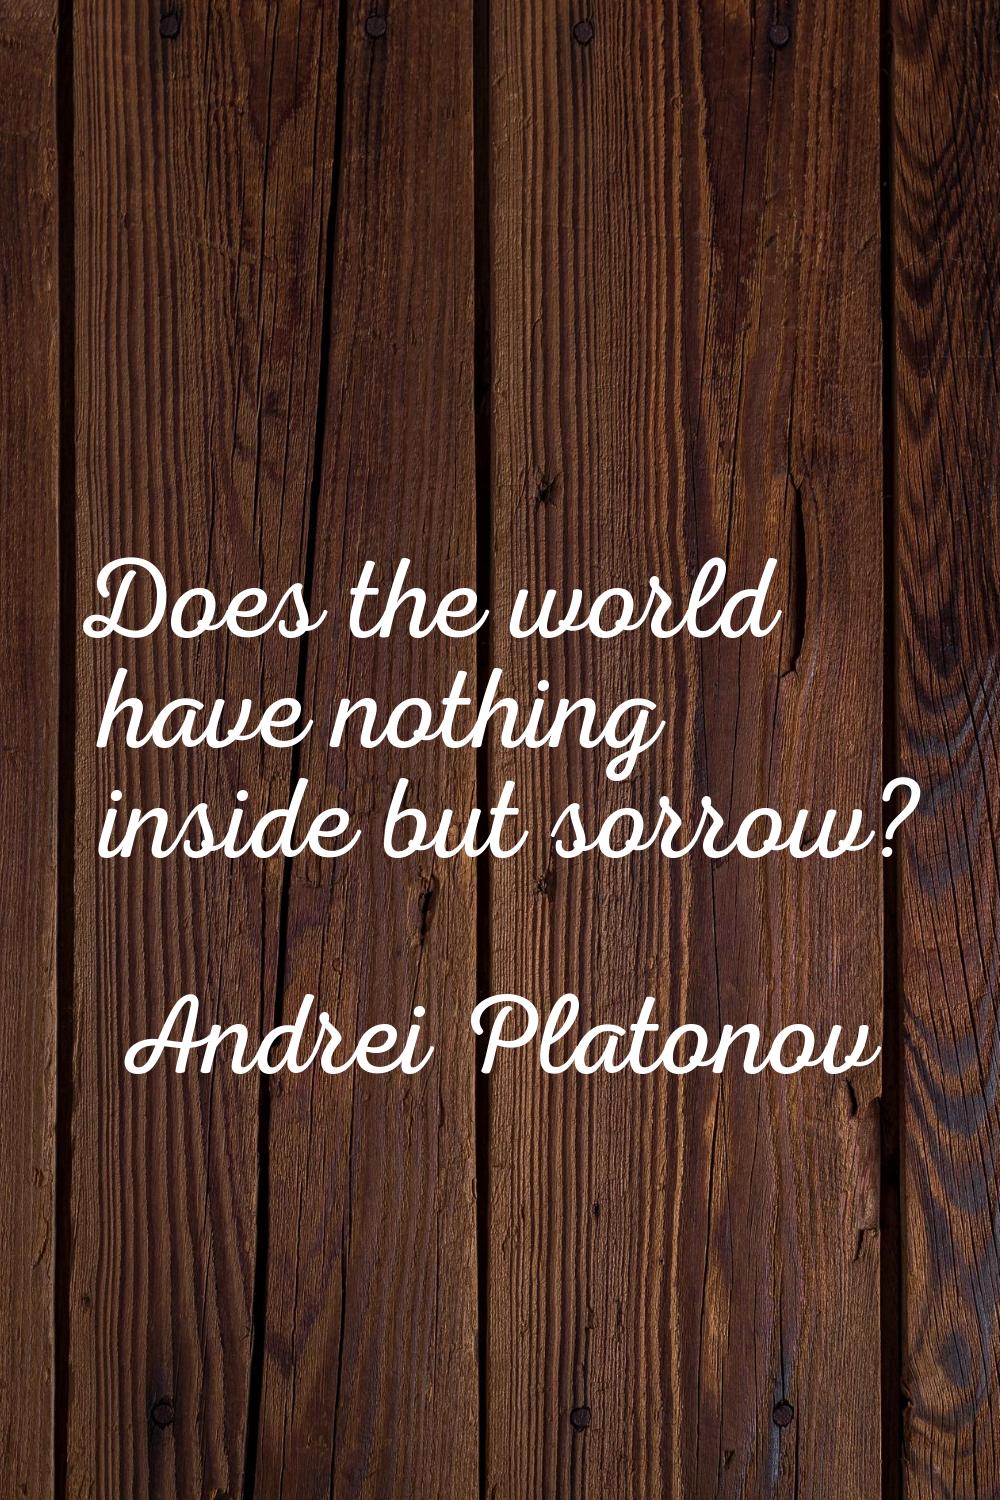 Does the world have nothing inside but sorrow?